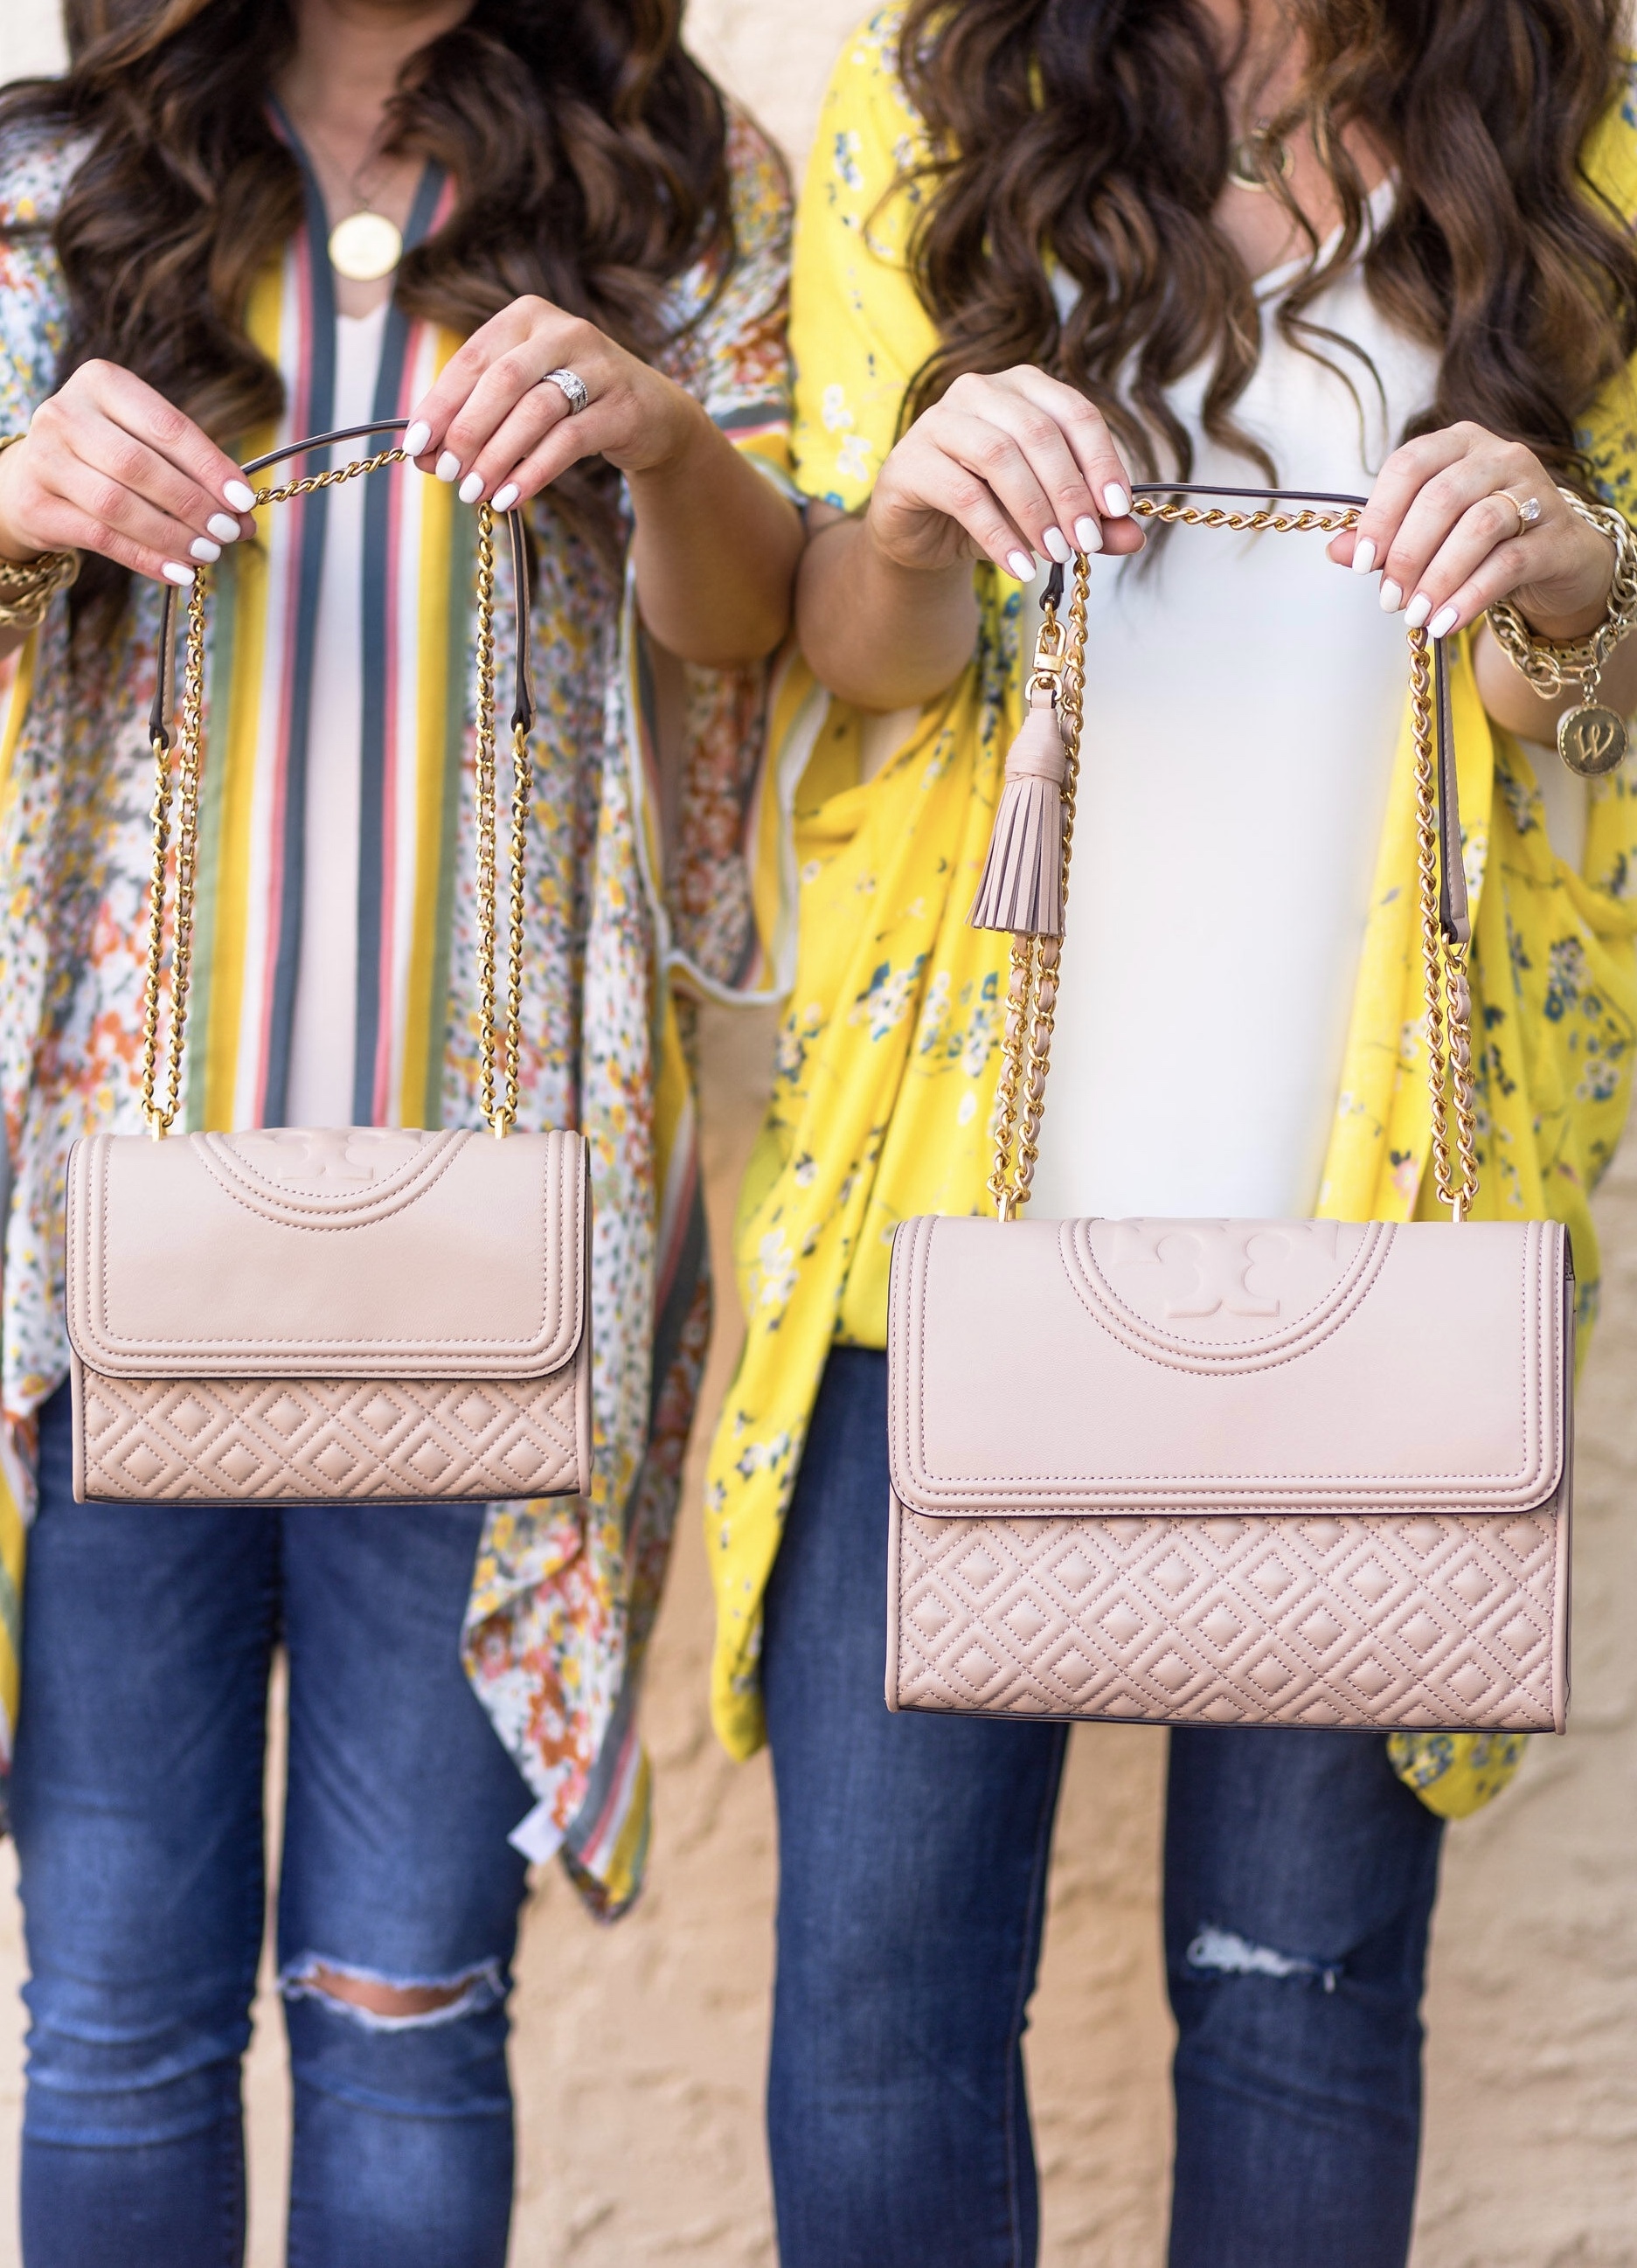 Tory Burch Deals on  6 - The Double Take Girls